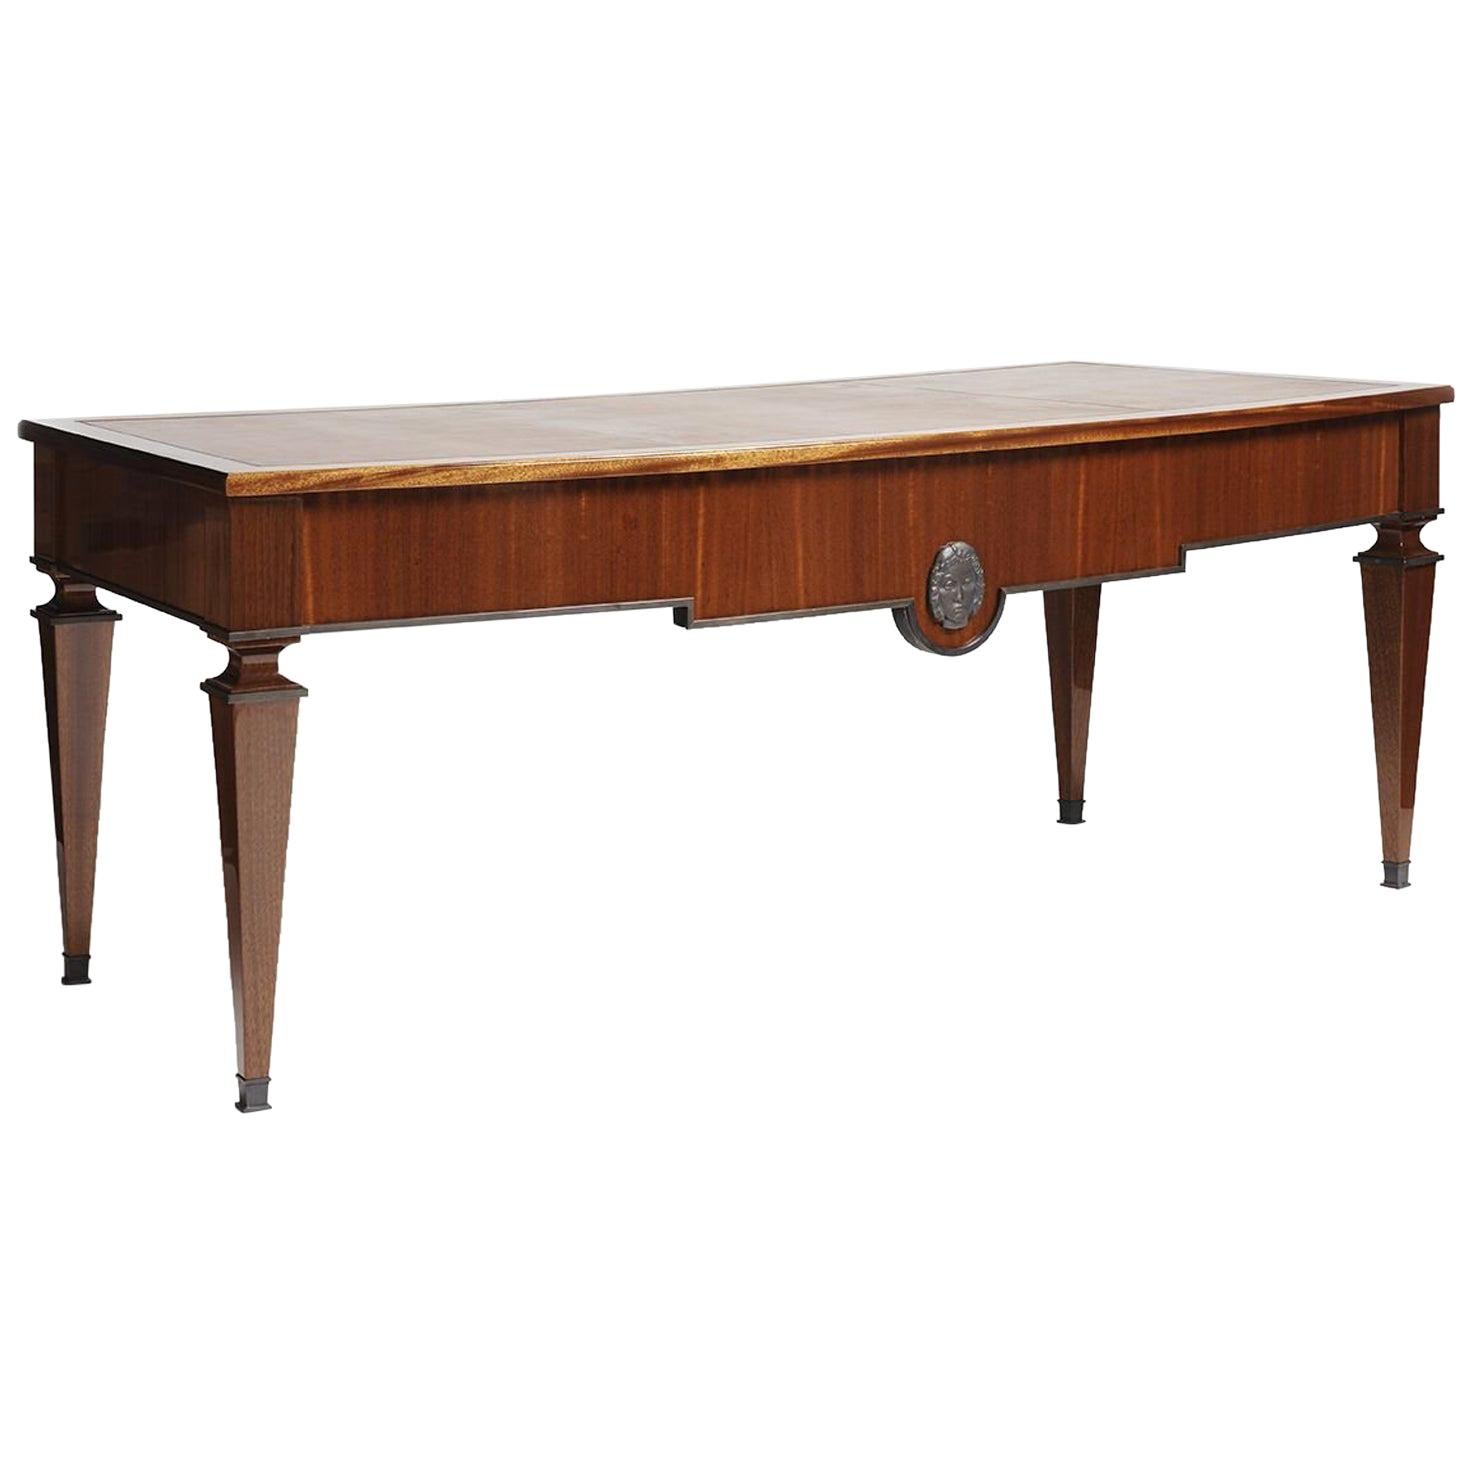 André Arbus, Large Desk in Mahogany, Leather, and Bronze, France, circa 1940